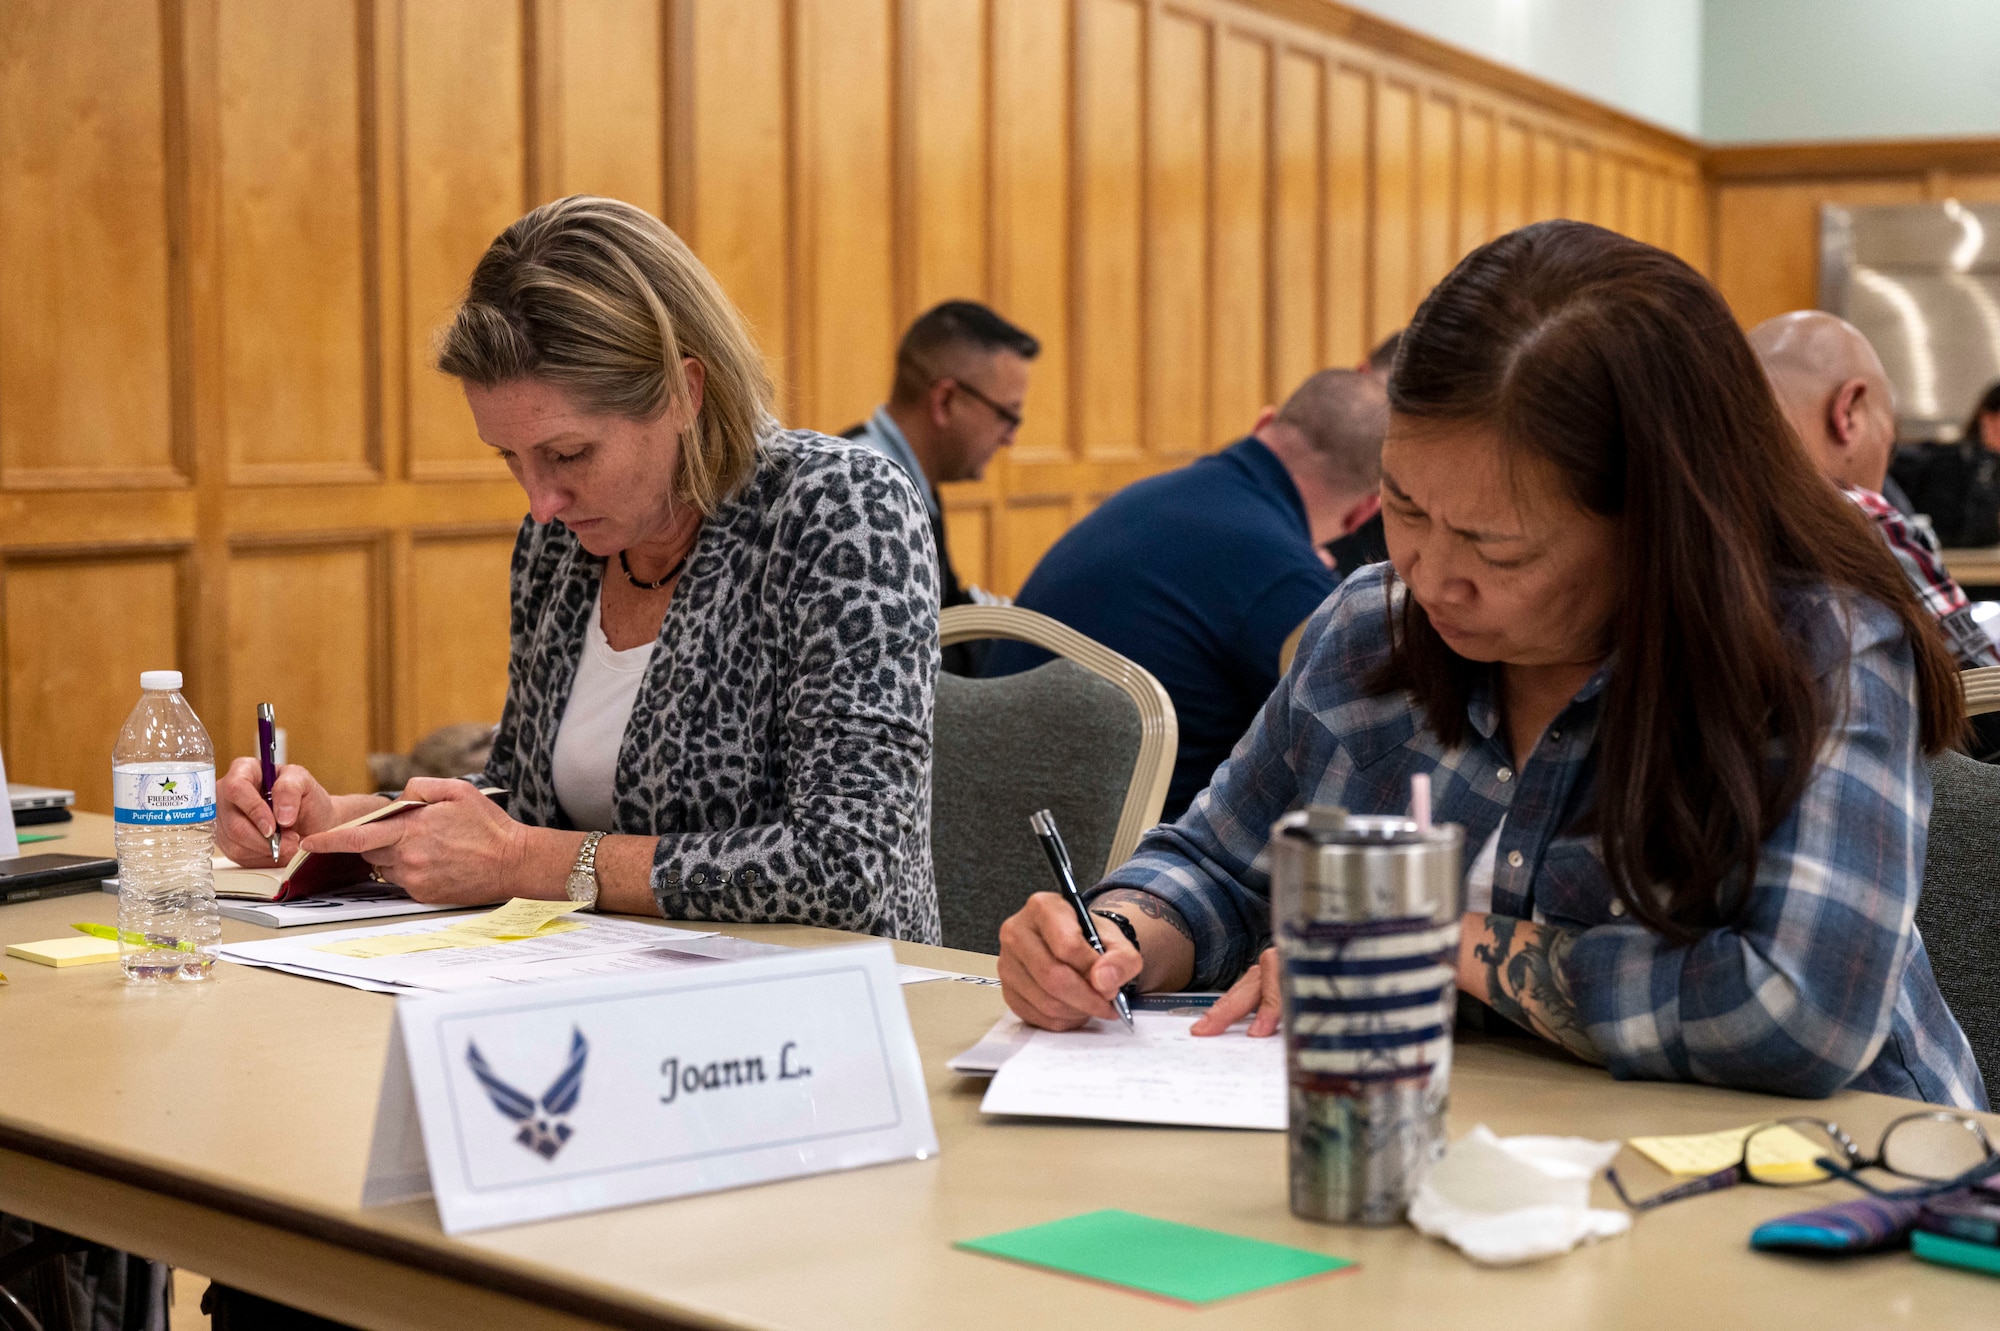 The 19th Airlift Wing commander and 19th Force Support Squadron deputy commander work on individual assignments during the Dare to Lead training.